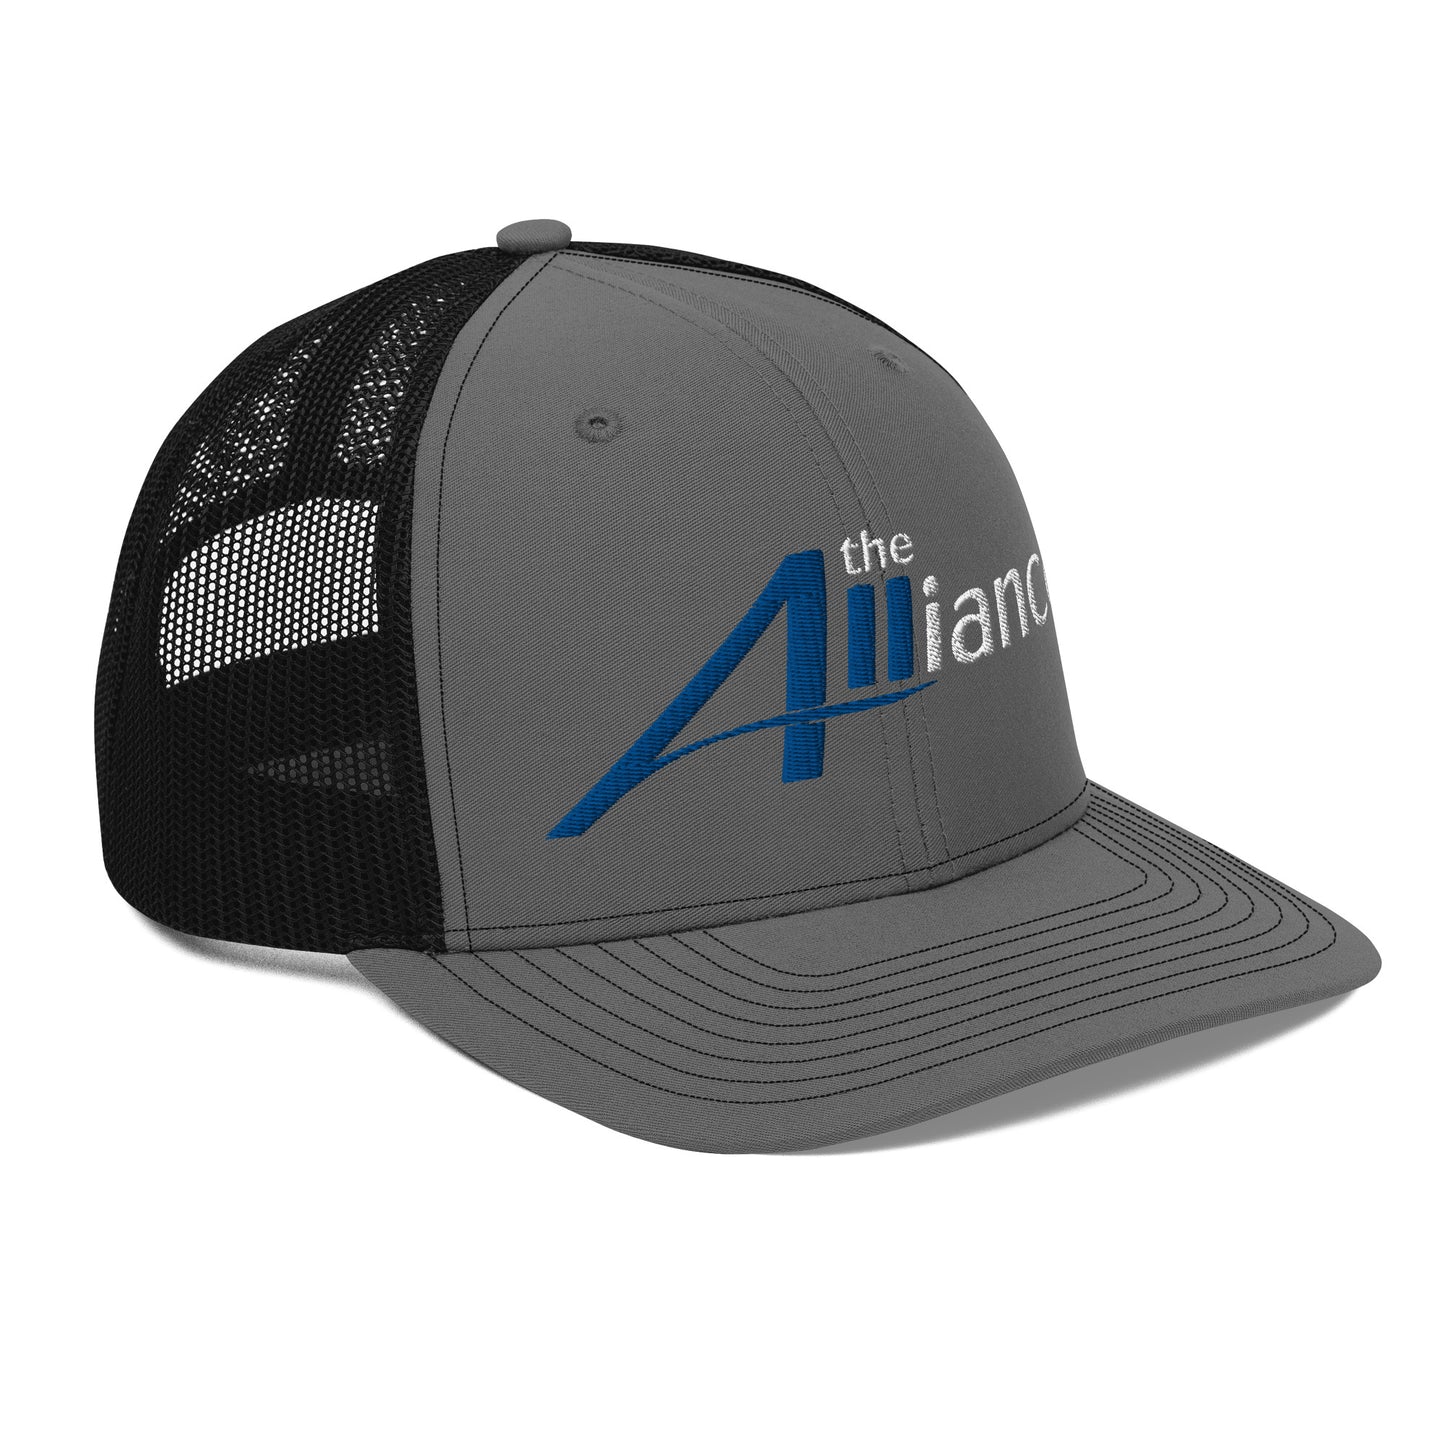 The Alliance - Embroidered Trucker Cap